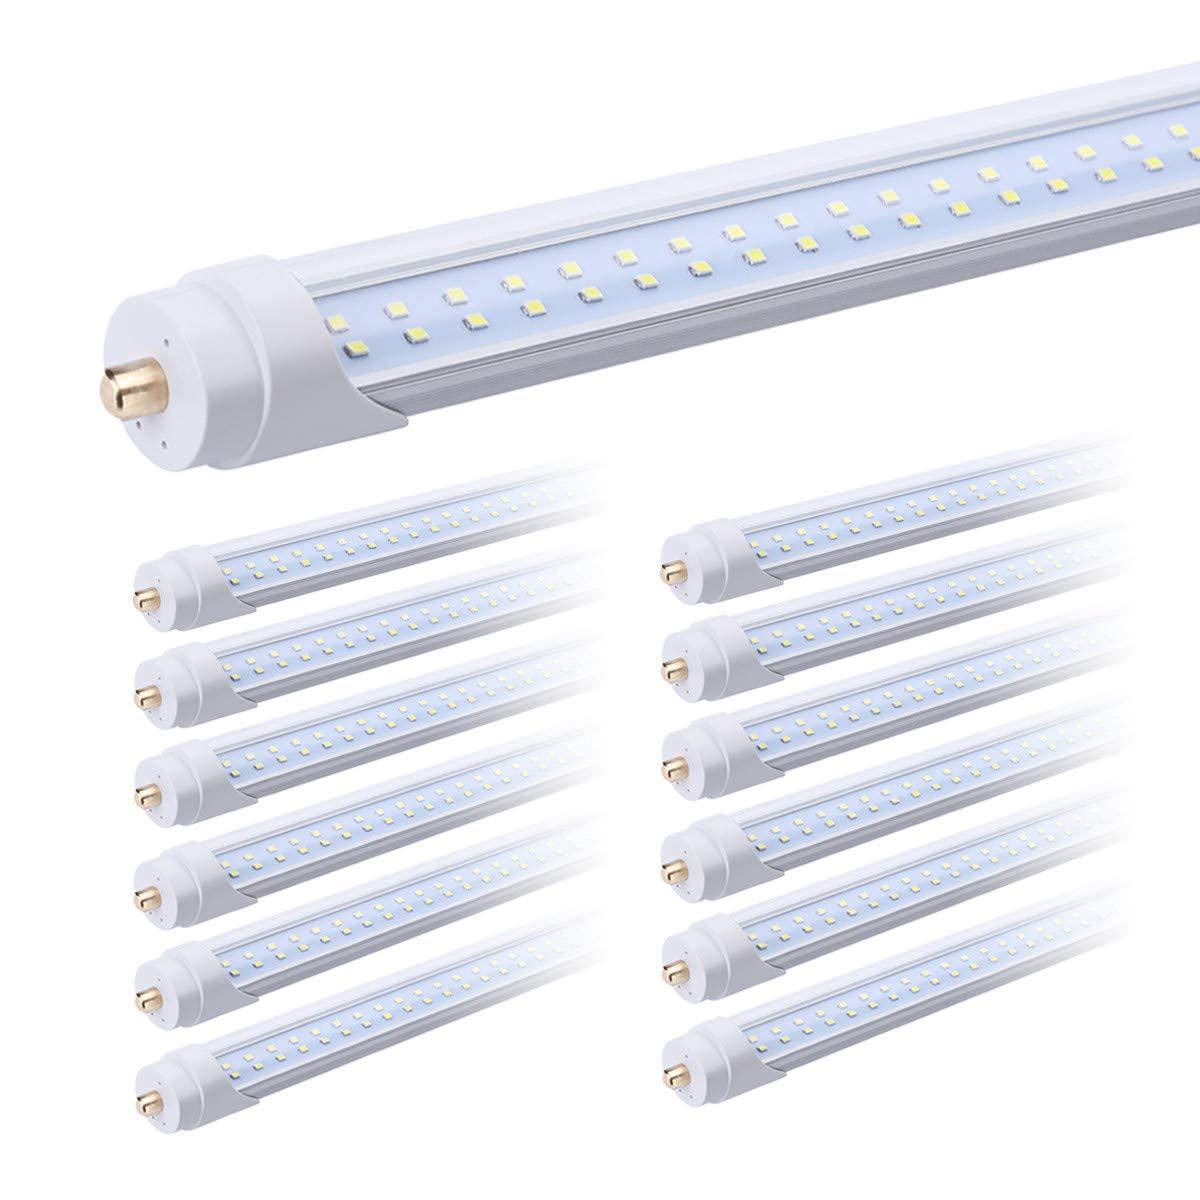 FALANFA 8ft led tube light double row 65w replacement 150w fluorescent lamp shop light bulb, single pin fa8 base dual-ended power col